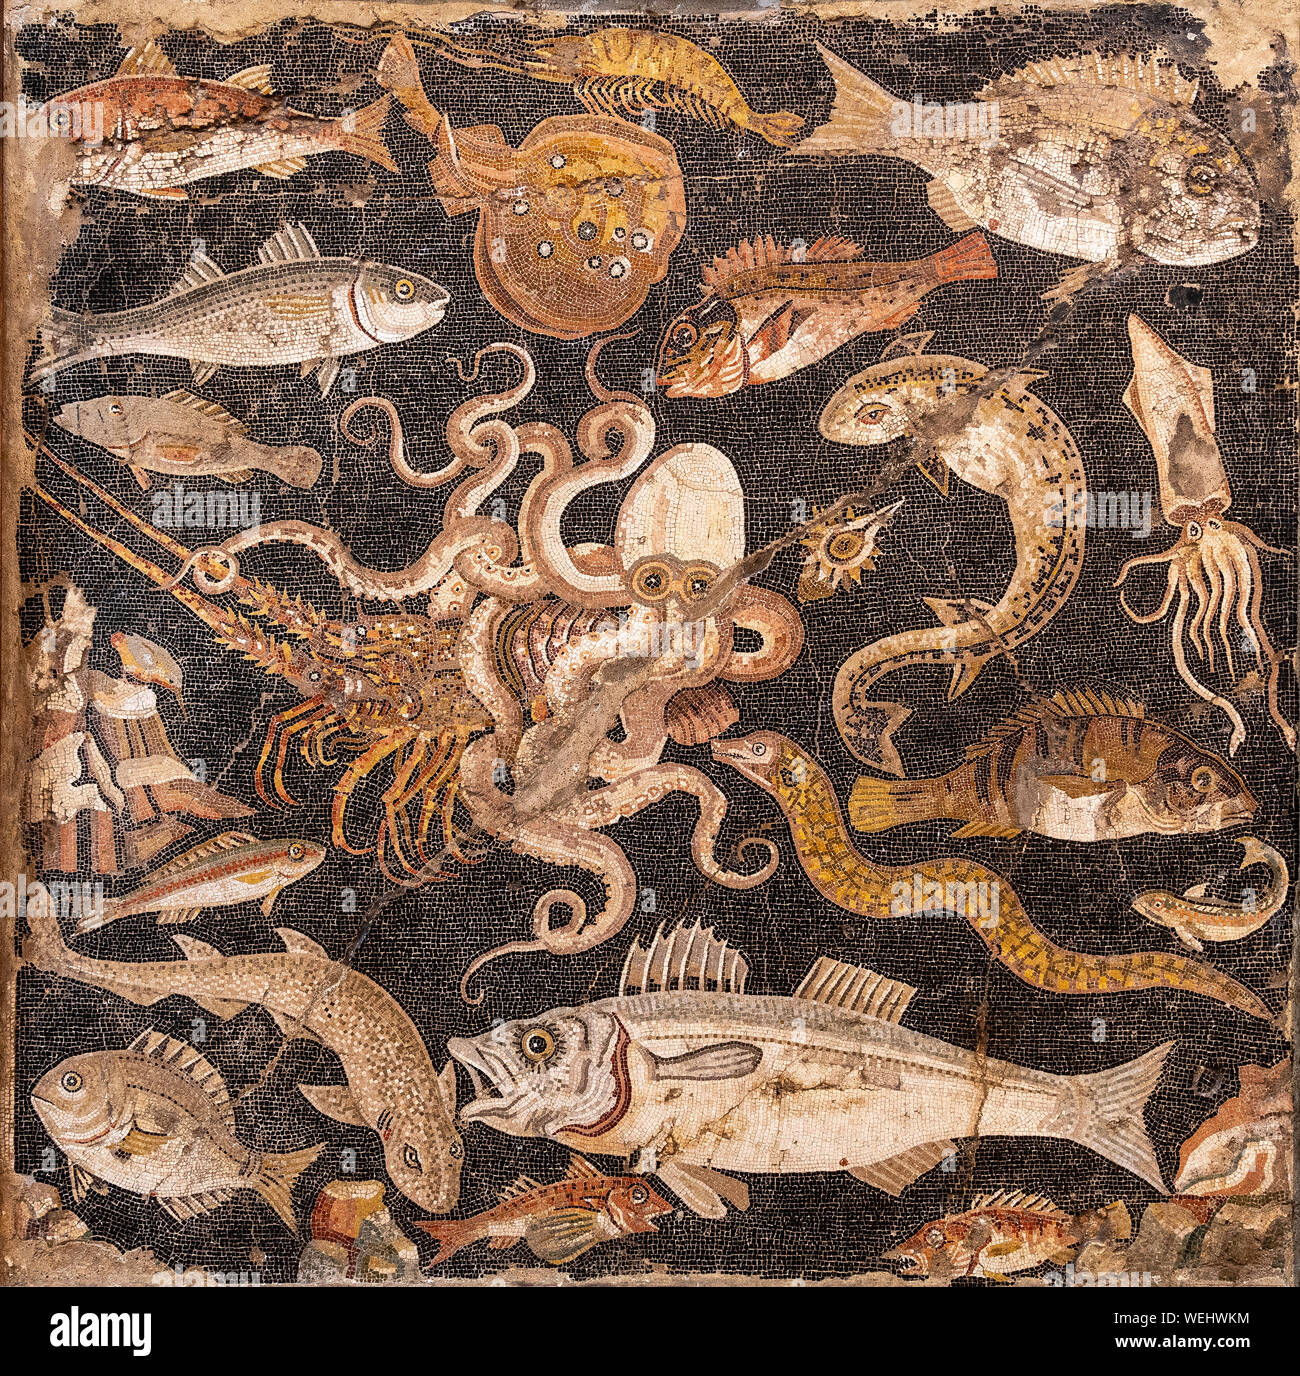 Roman wall mosaic from Pompeii depicting Mediterranean marine life, now at the Naples Archaeological Museum. Naples, Italy Stock Photo